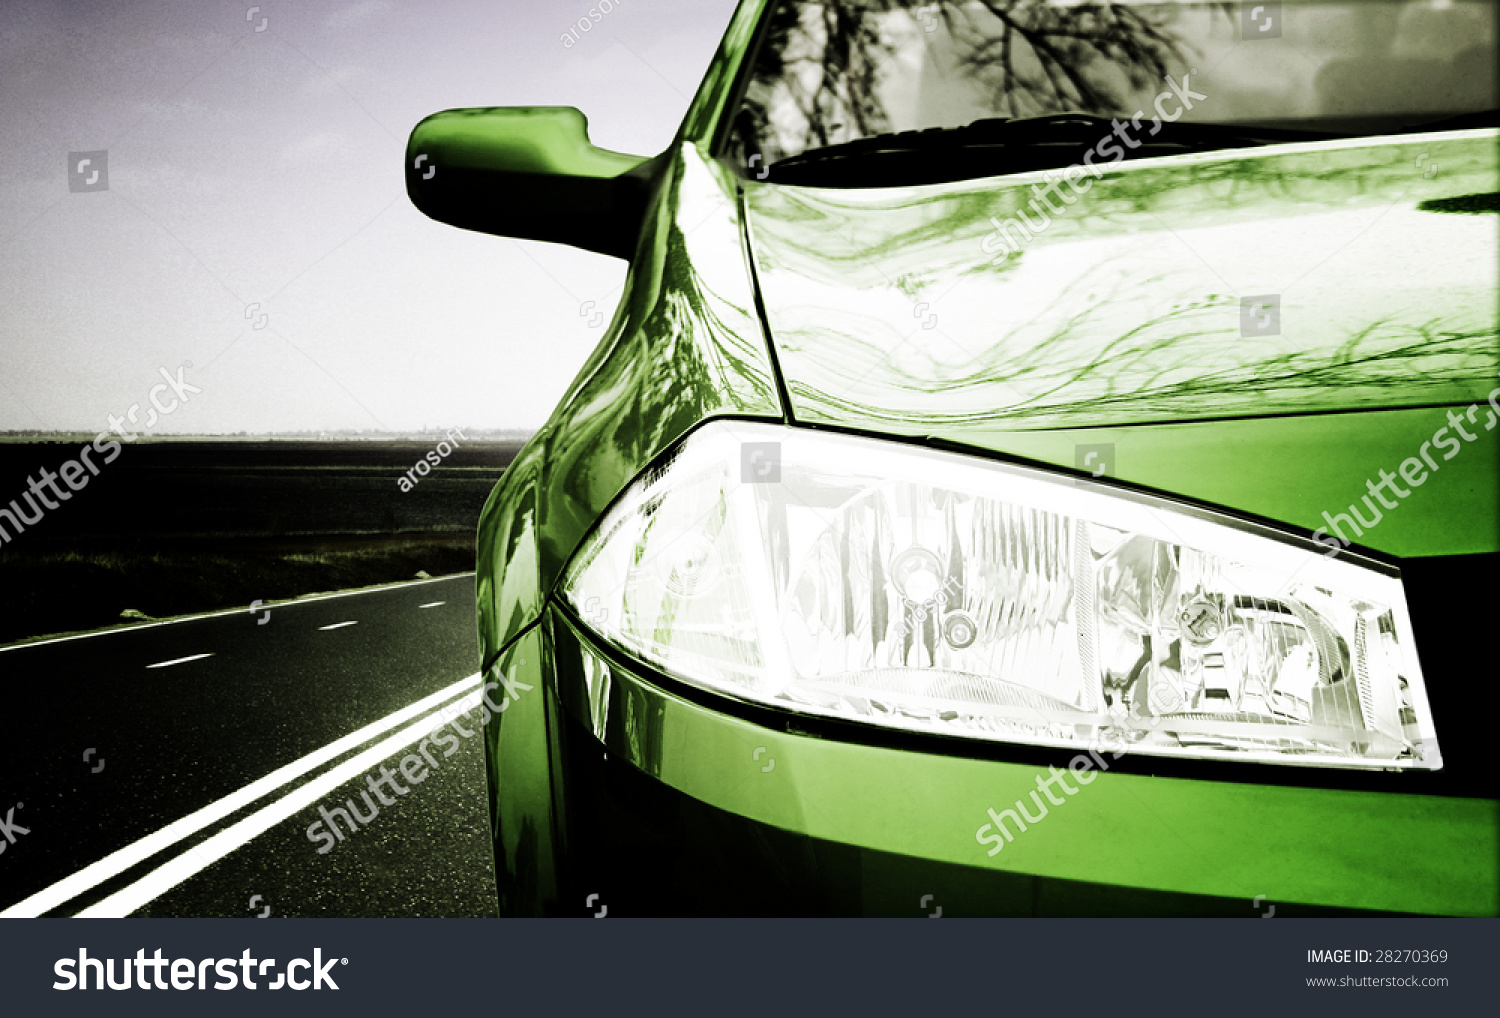 Beautiful Car. Great Color. Very Good Details. Stock Photo 28270369 : Shutterstock